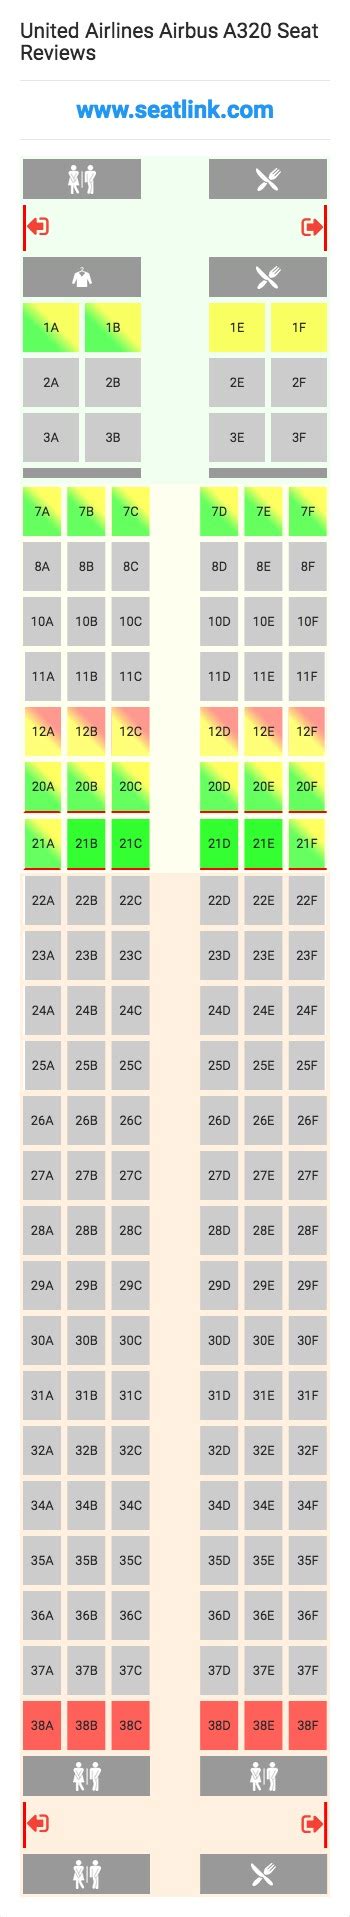 United Airlines Airbus A Seating Chart Updated March Seatlink Free Hot Nude Porn Pic